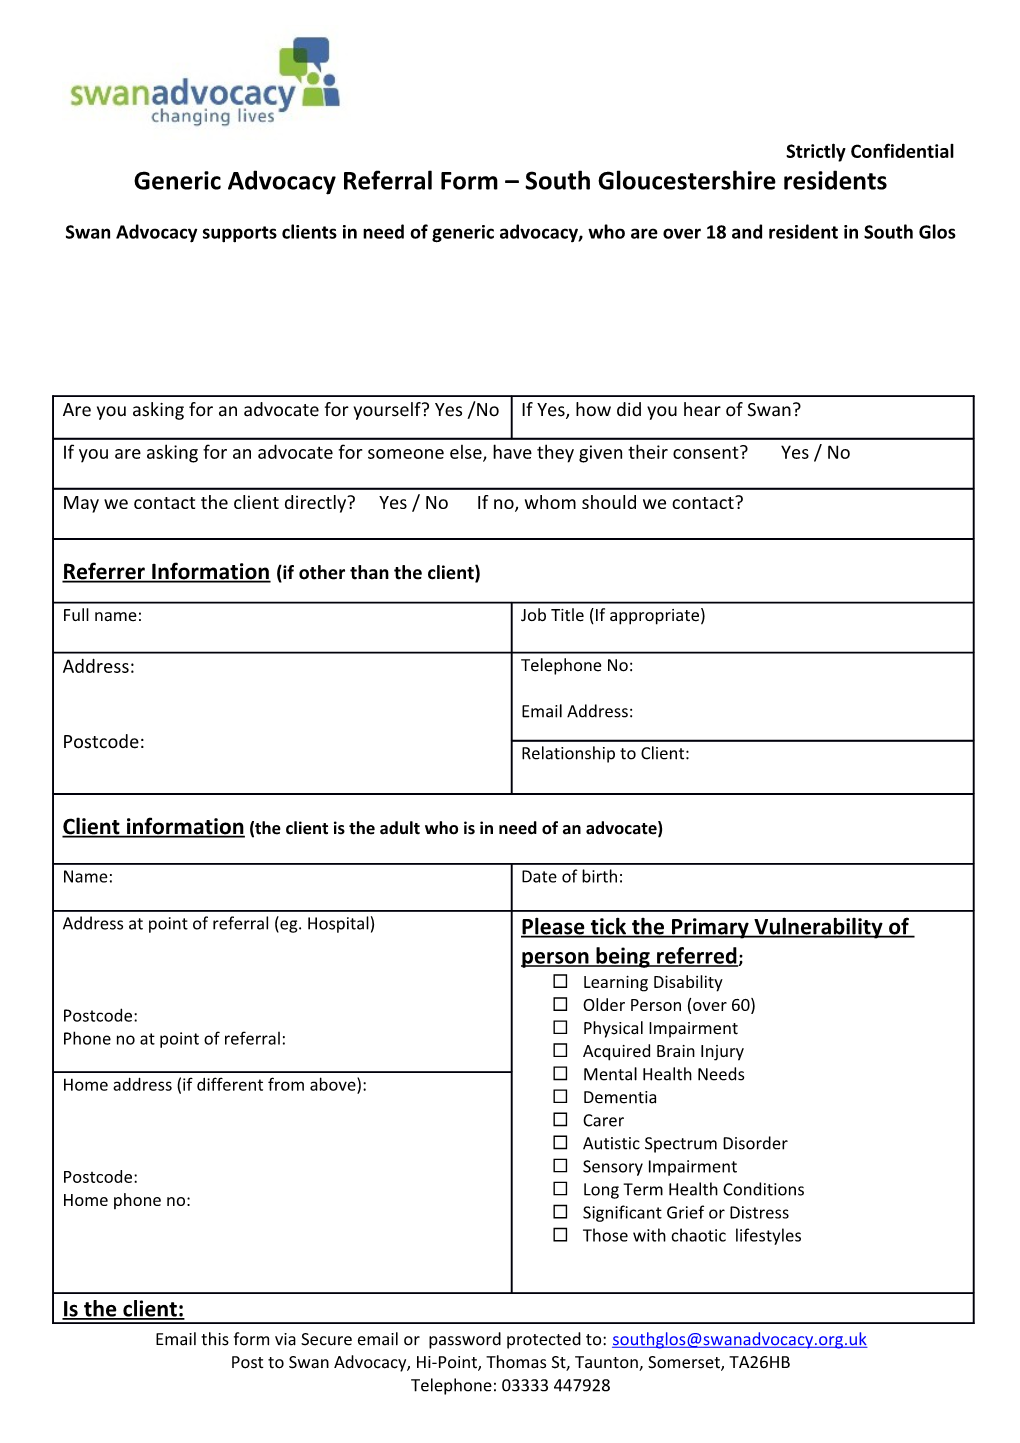 Generic Advocacy Referral Form South Gloucestershire Residents